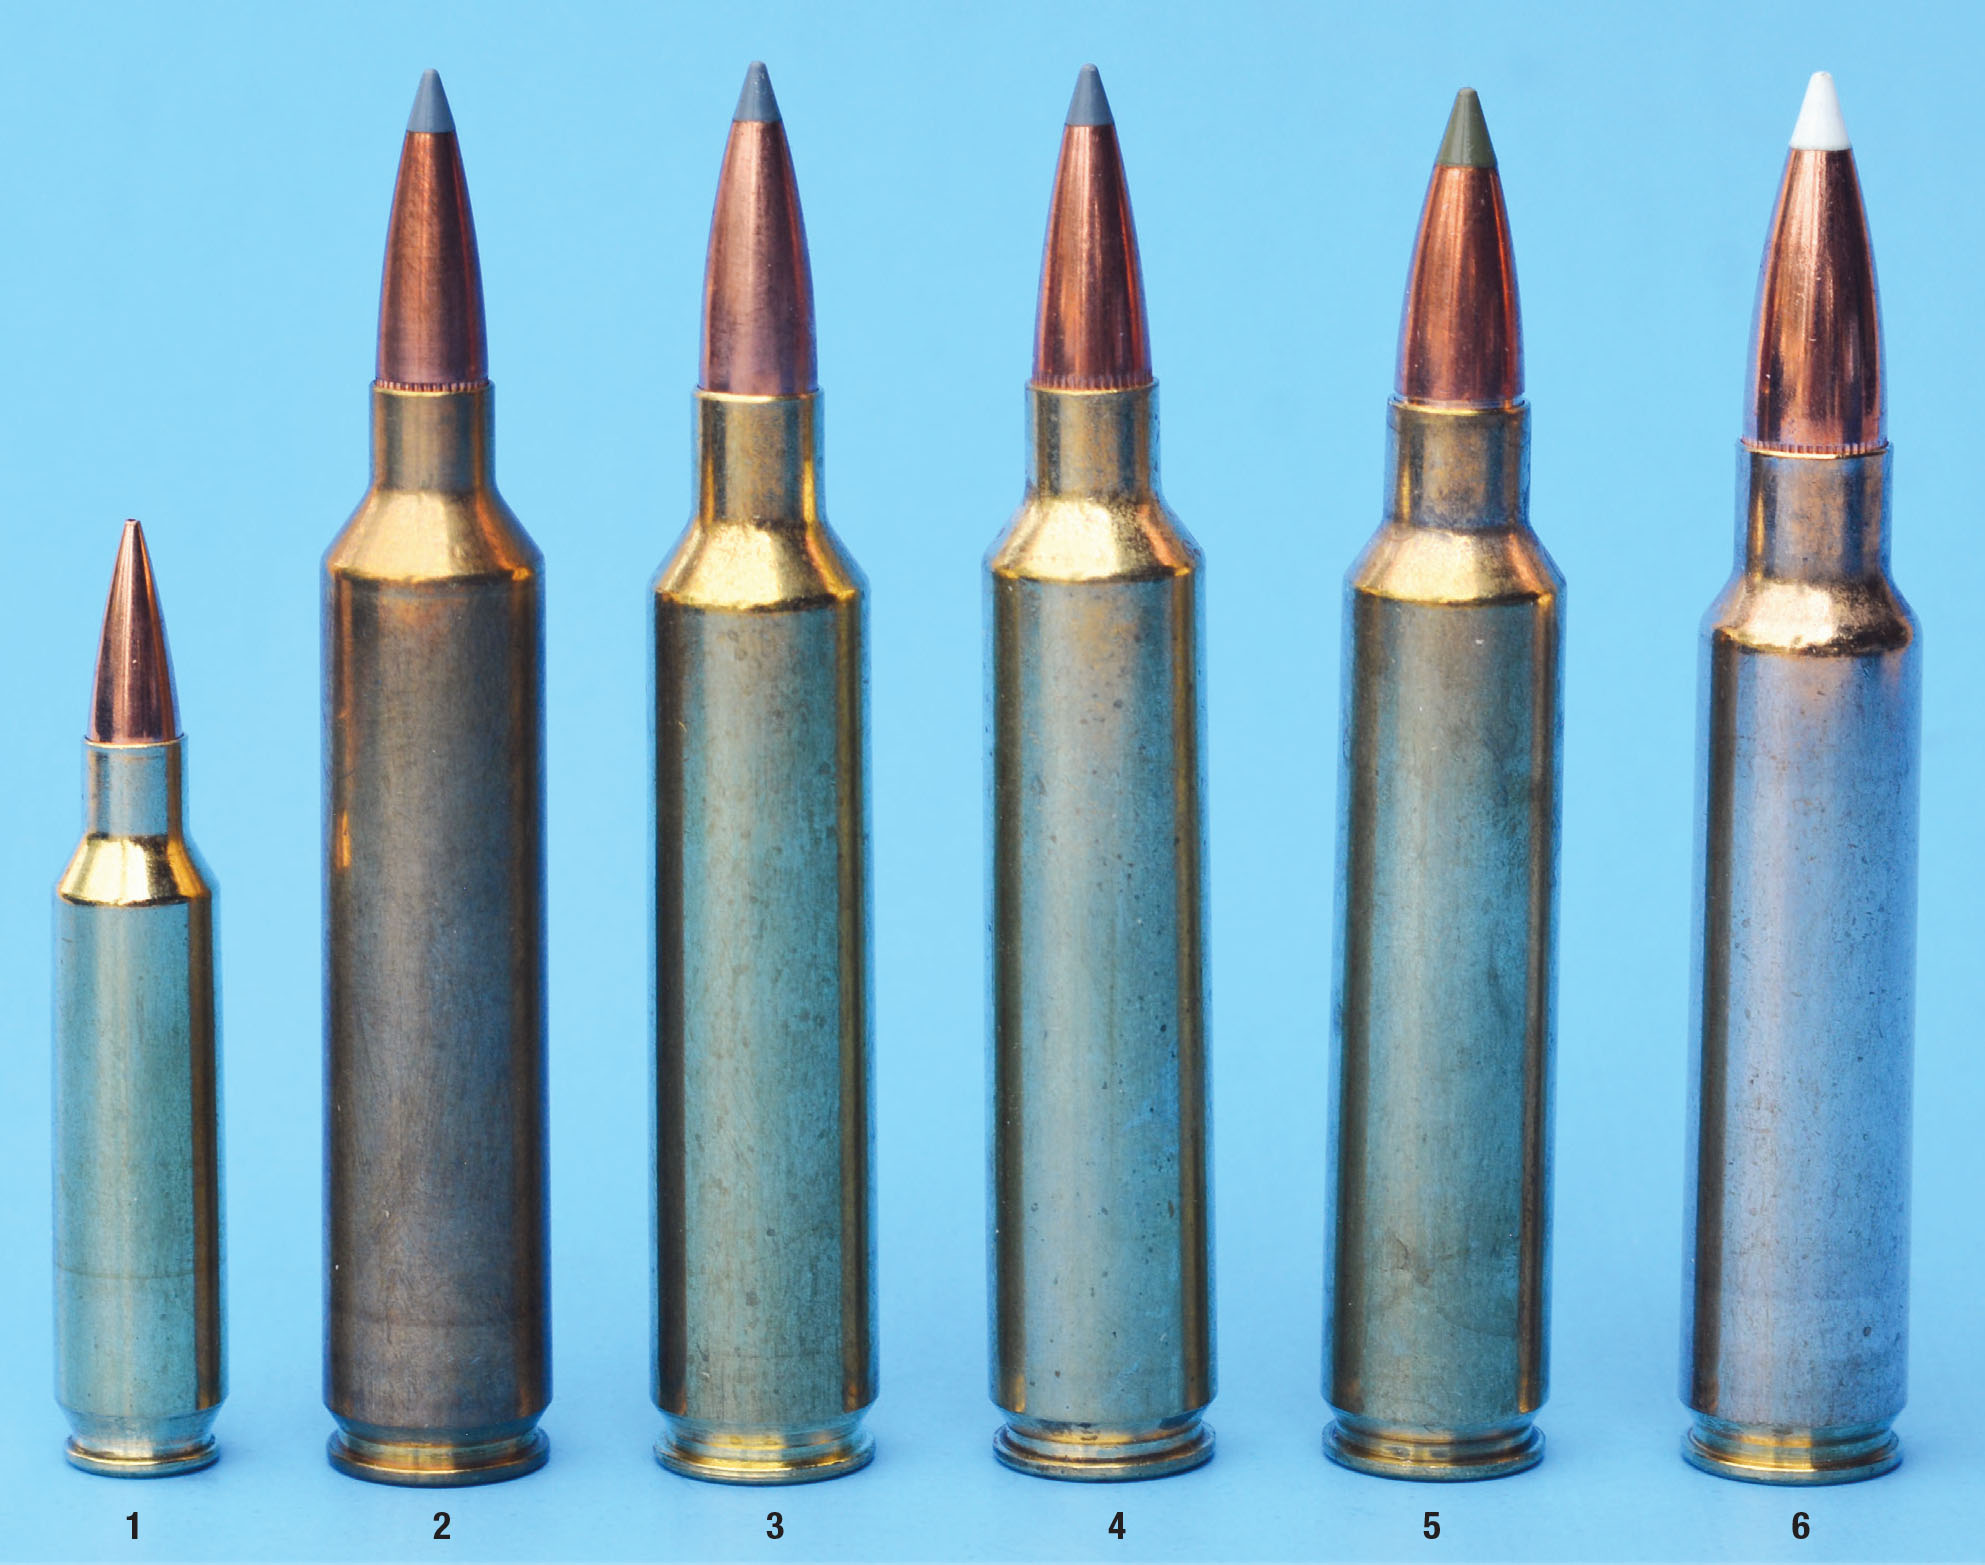 Head to Head: 26 Nosler vs. 6.5-300 Weatherby Magnum